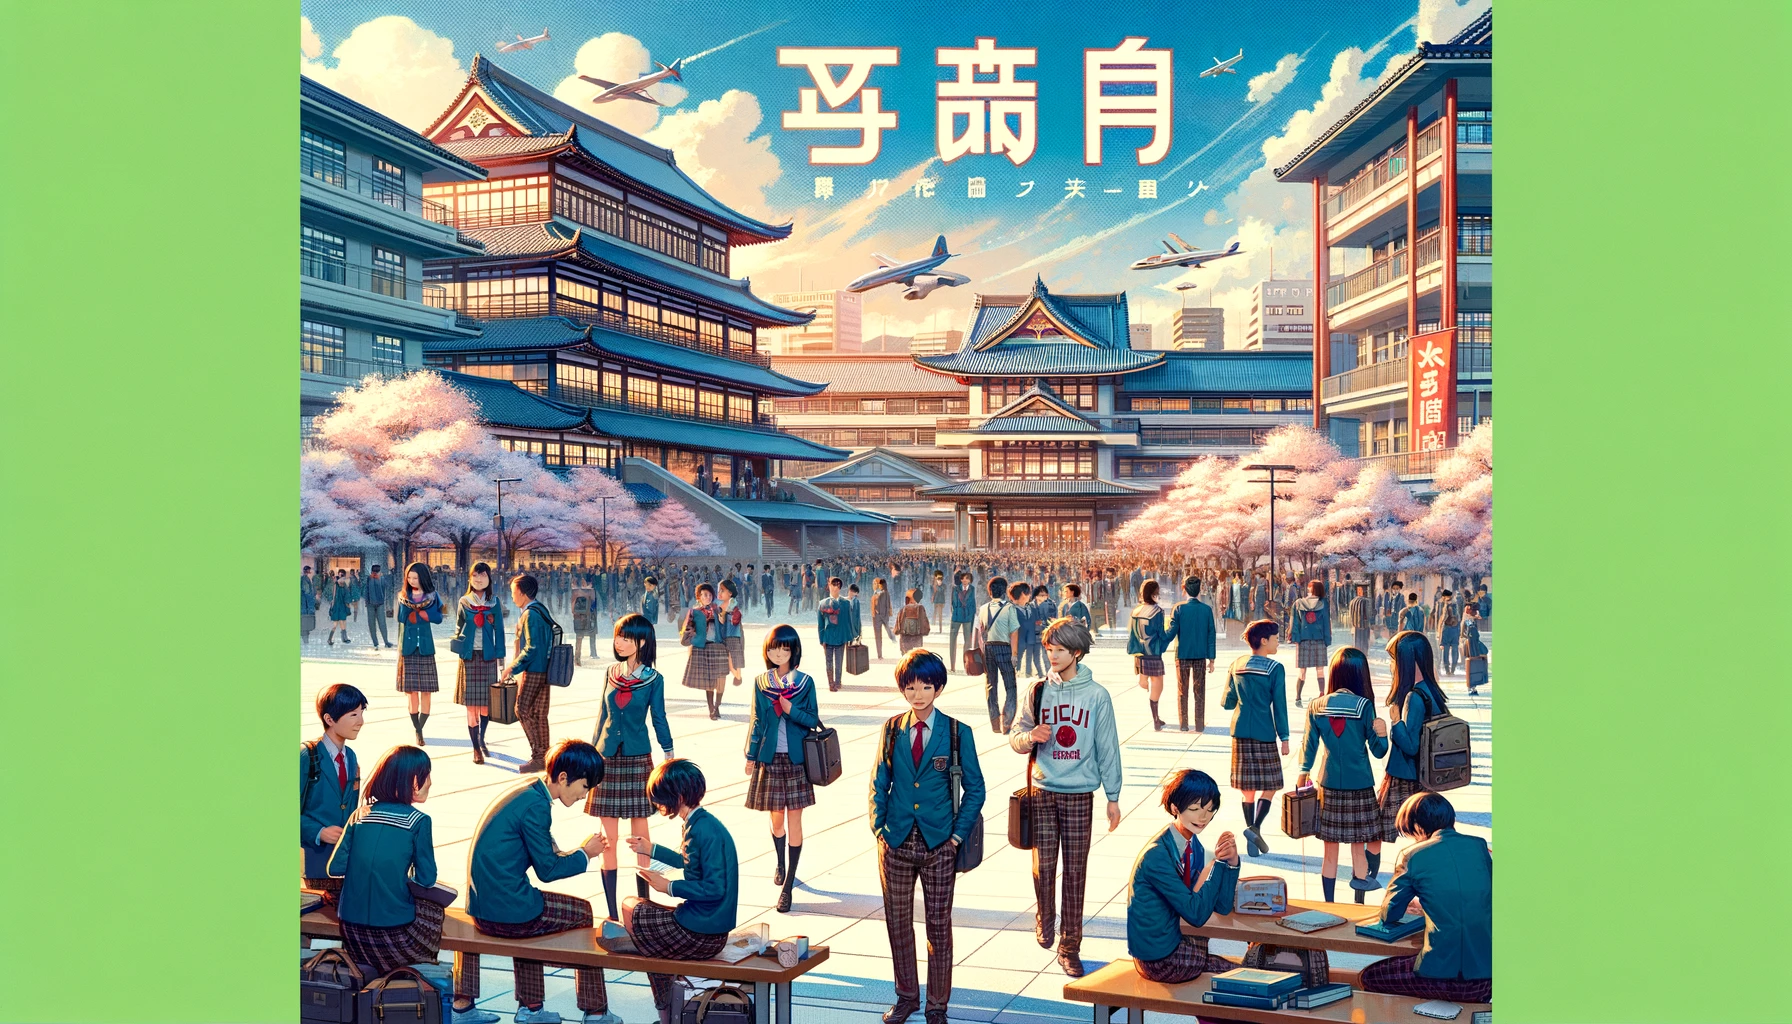 A lively high school campus scene illustrating the popularity of Meiji High School in Japan, with the word 'Meiji' prominently displayed in the sky. The image features a diverse group of students of various Asian descents, in school uniforms, engaged in various activities. Students are seen chatting, studying, and participating in sports on a well-maintained campus with modern and traditional architectural elements. There are cherry trees in bloom, adding a picturesque quality to the setting. The atmosphere is vibrant and energetic, capturing the essence of a bustling and popular educational institution.